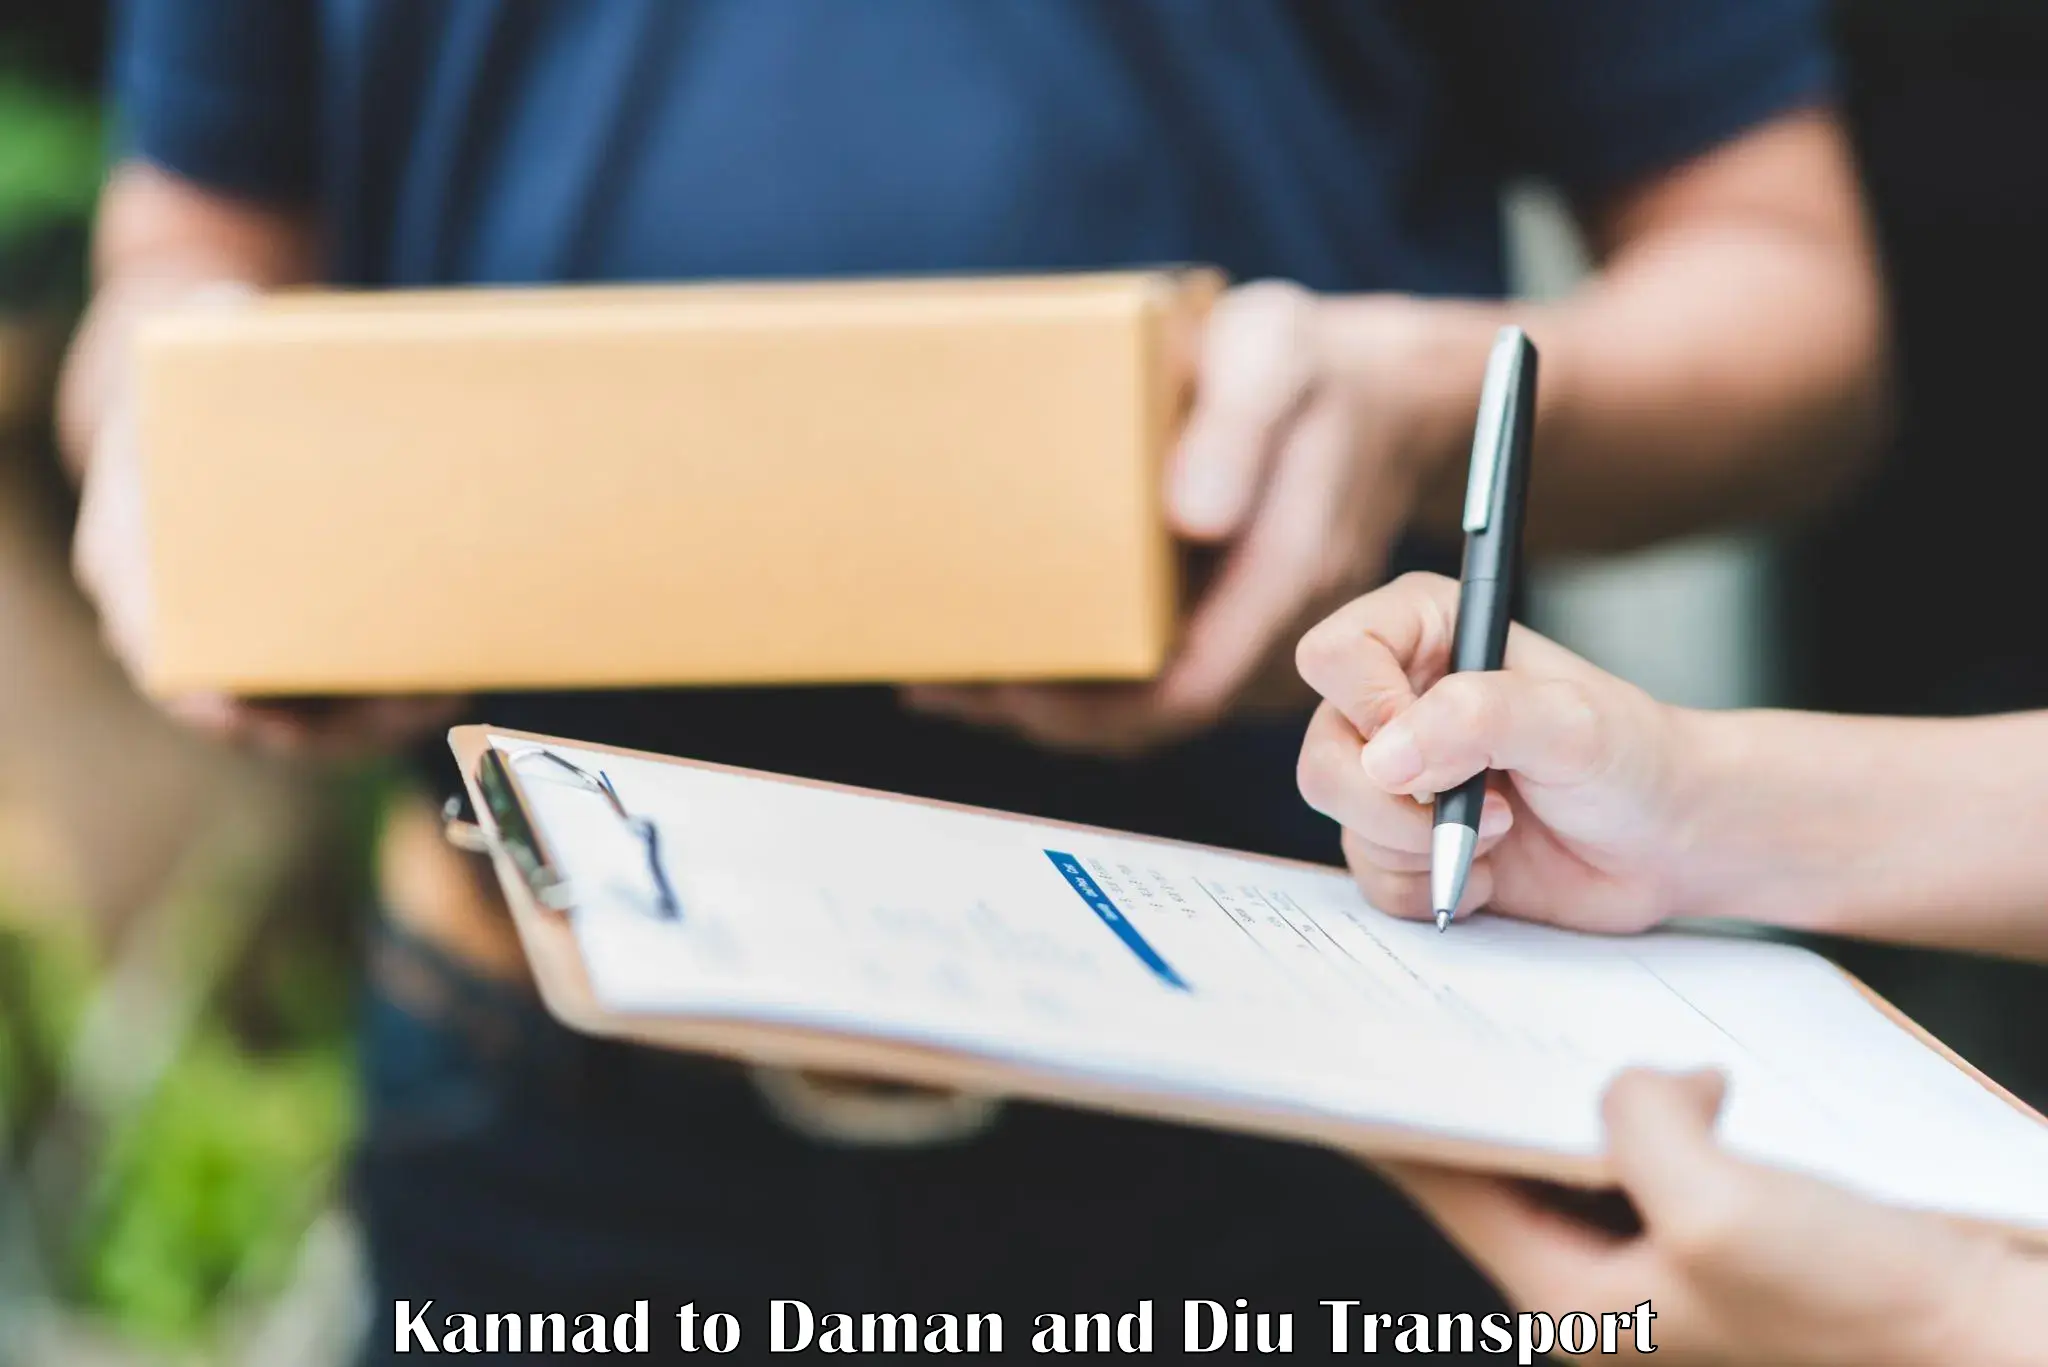 Container transportation services Kannad to Diu